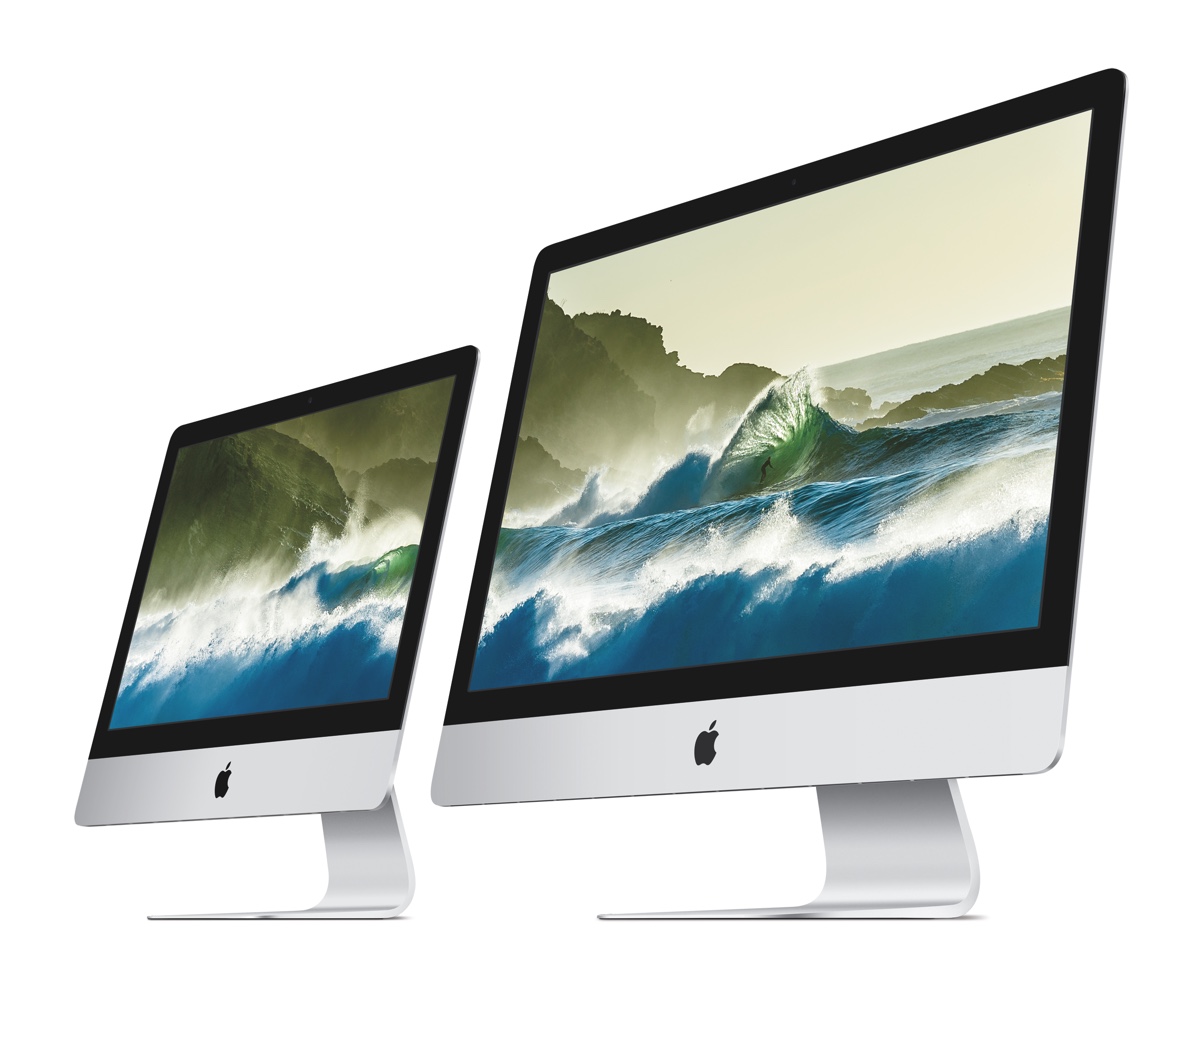 Apple CEO Tim Cook Assures Employees That New Desktop Mac Models Are on the Way